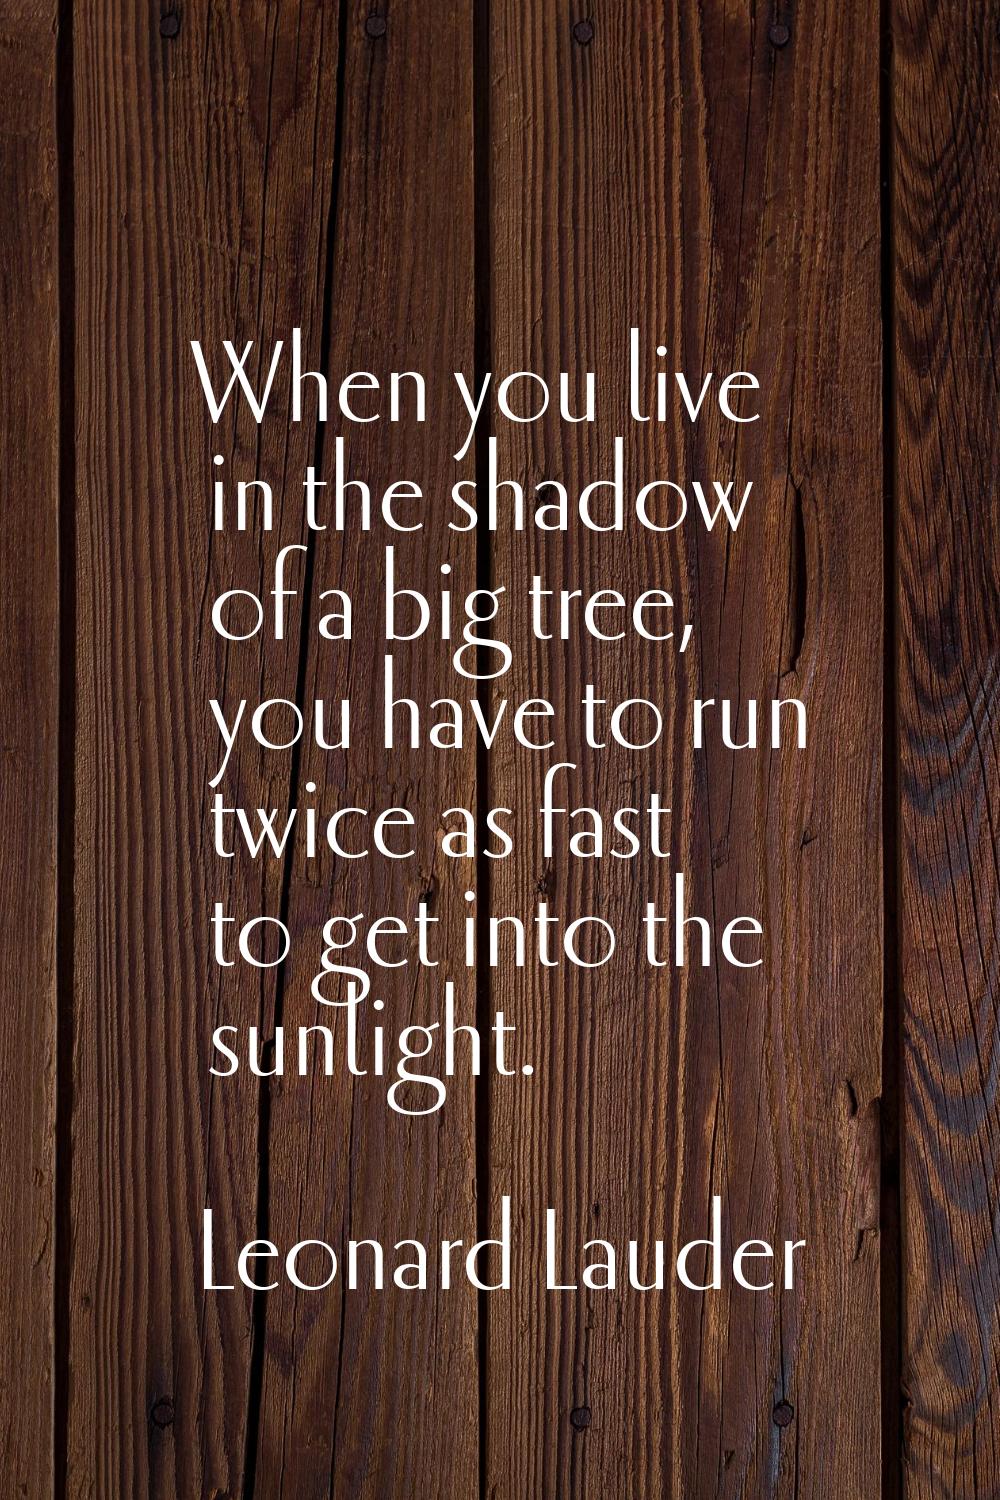 When you live in the shadow of a big tree, you have to run twice as fast to get into the sunlight.